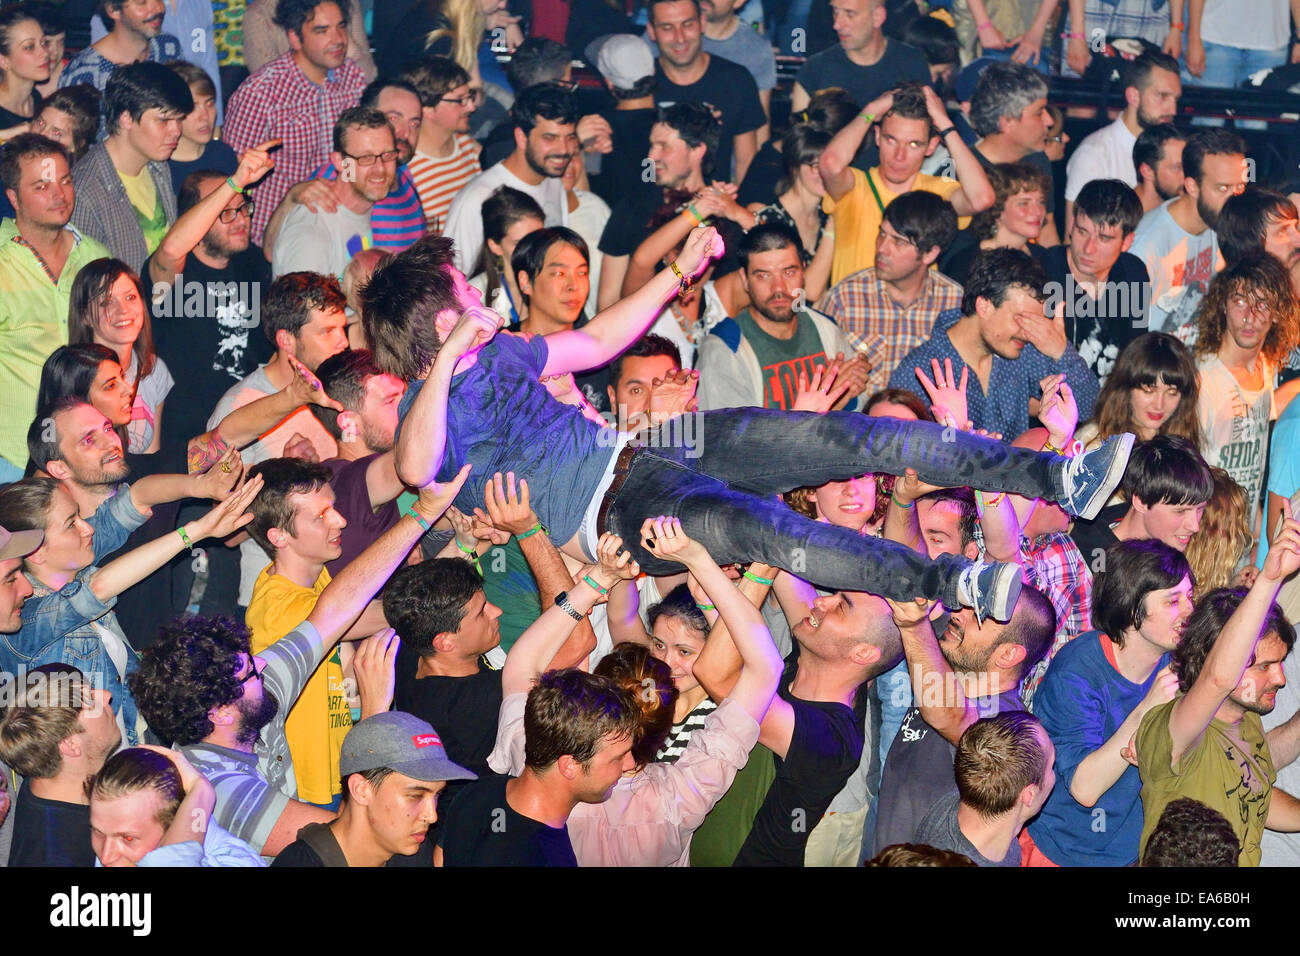 BARCELONA - MAY 30: The audience doing crowd surfing (also known as mosh pit) at Heineken Primavera Sound 2014 Festival. Stock Photo